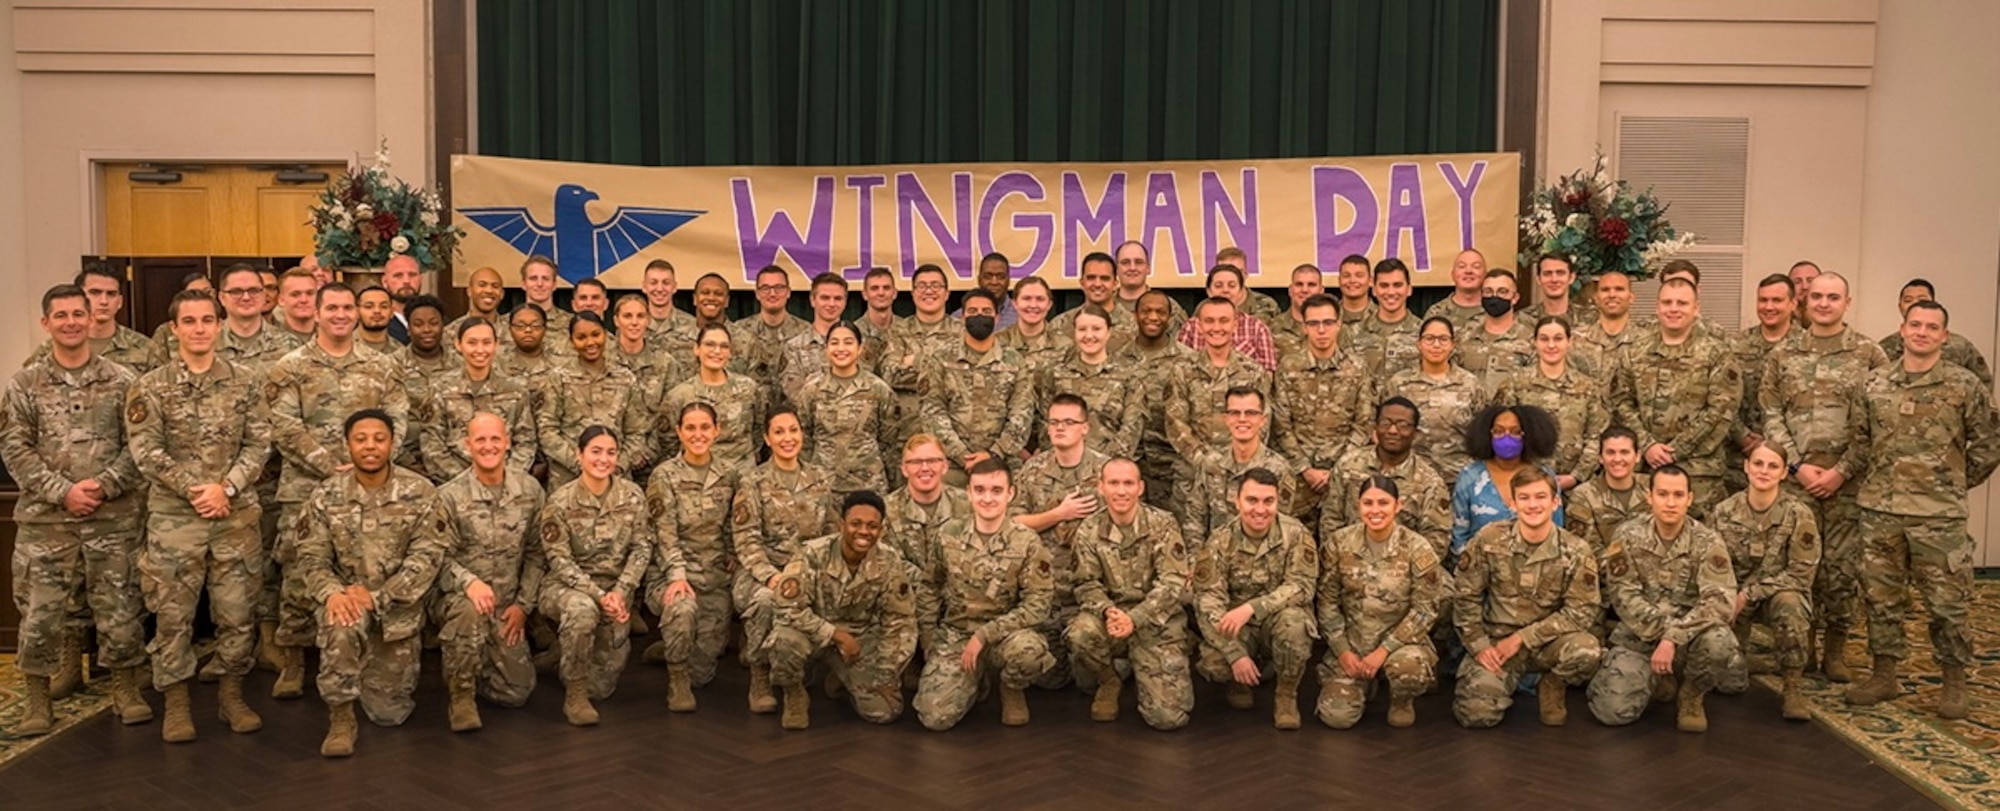 A large group of Airmen pose for a photo in a room.